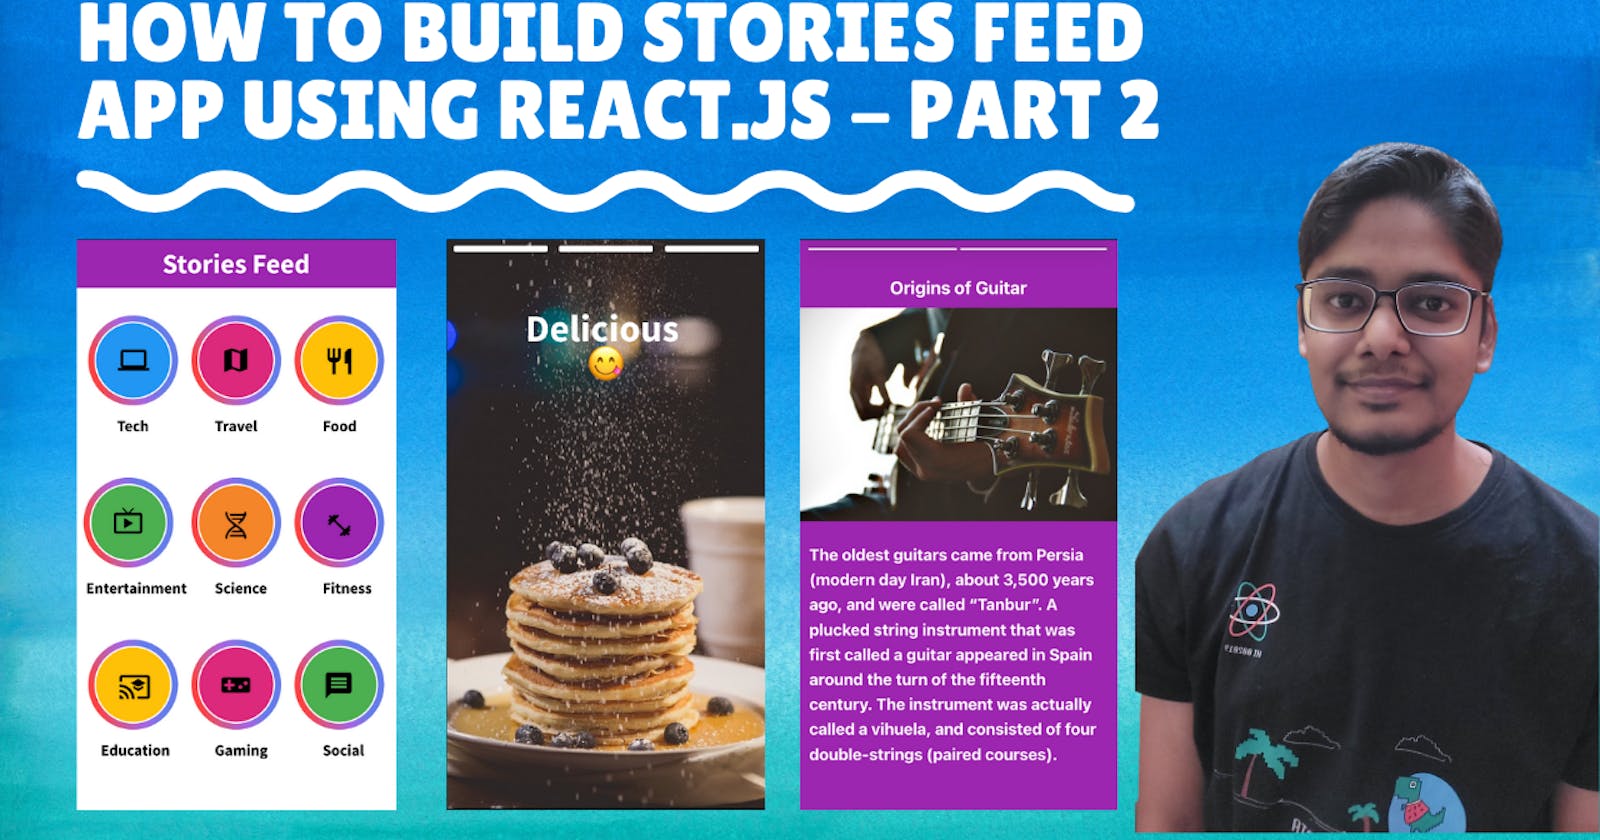 Build stories feed app using react.js - Part 2